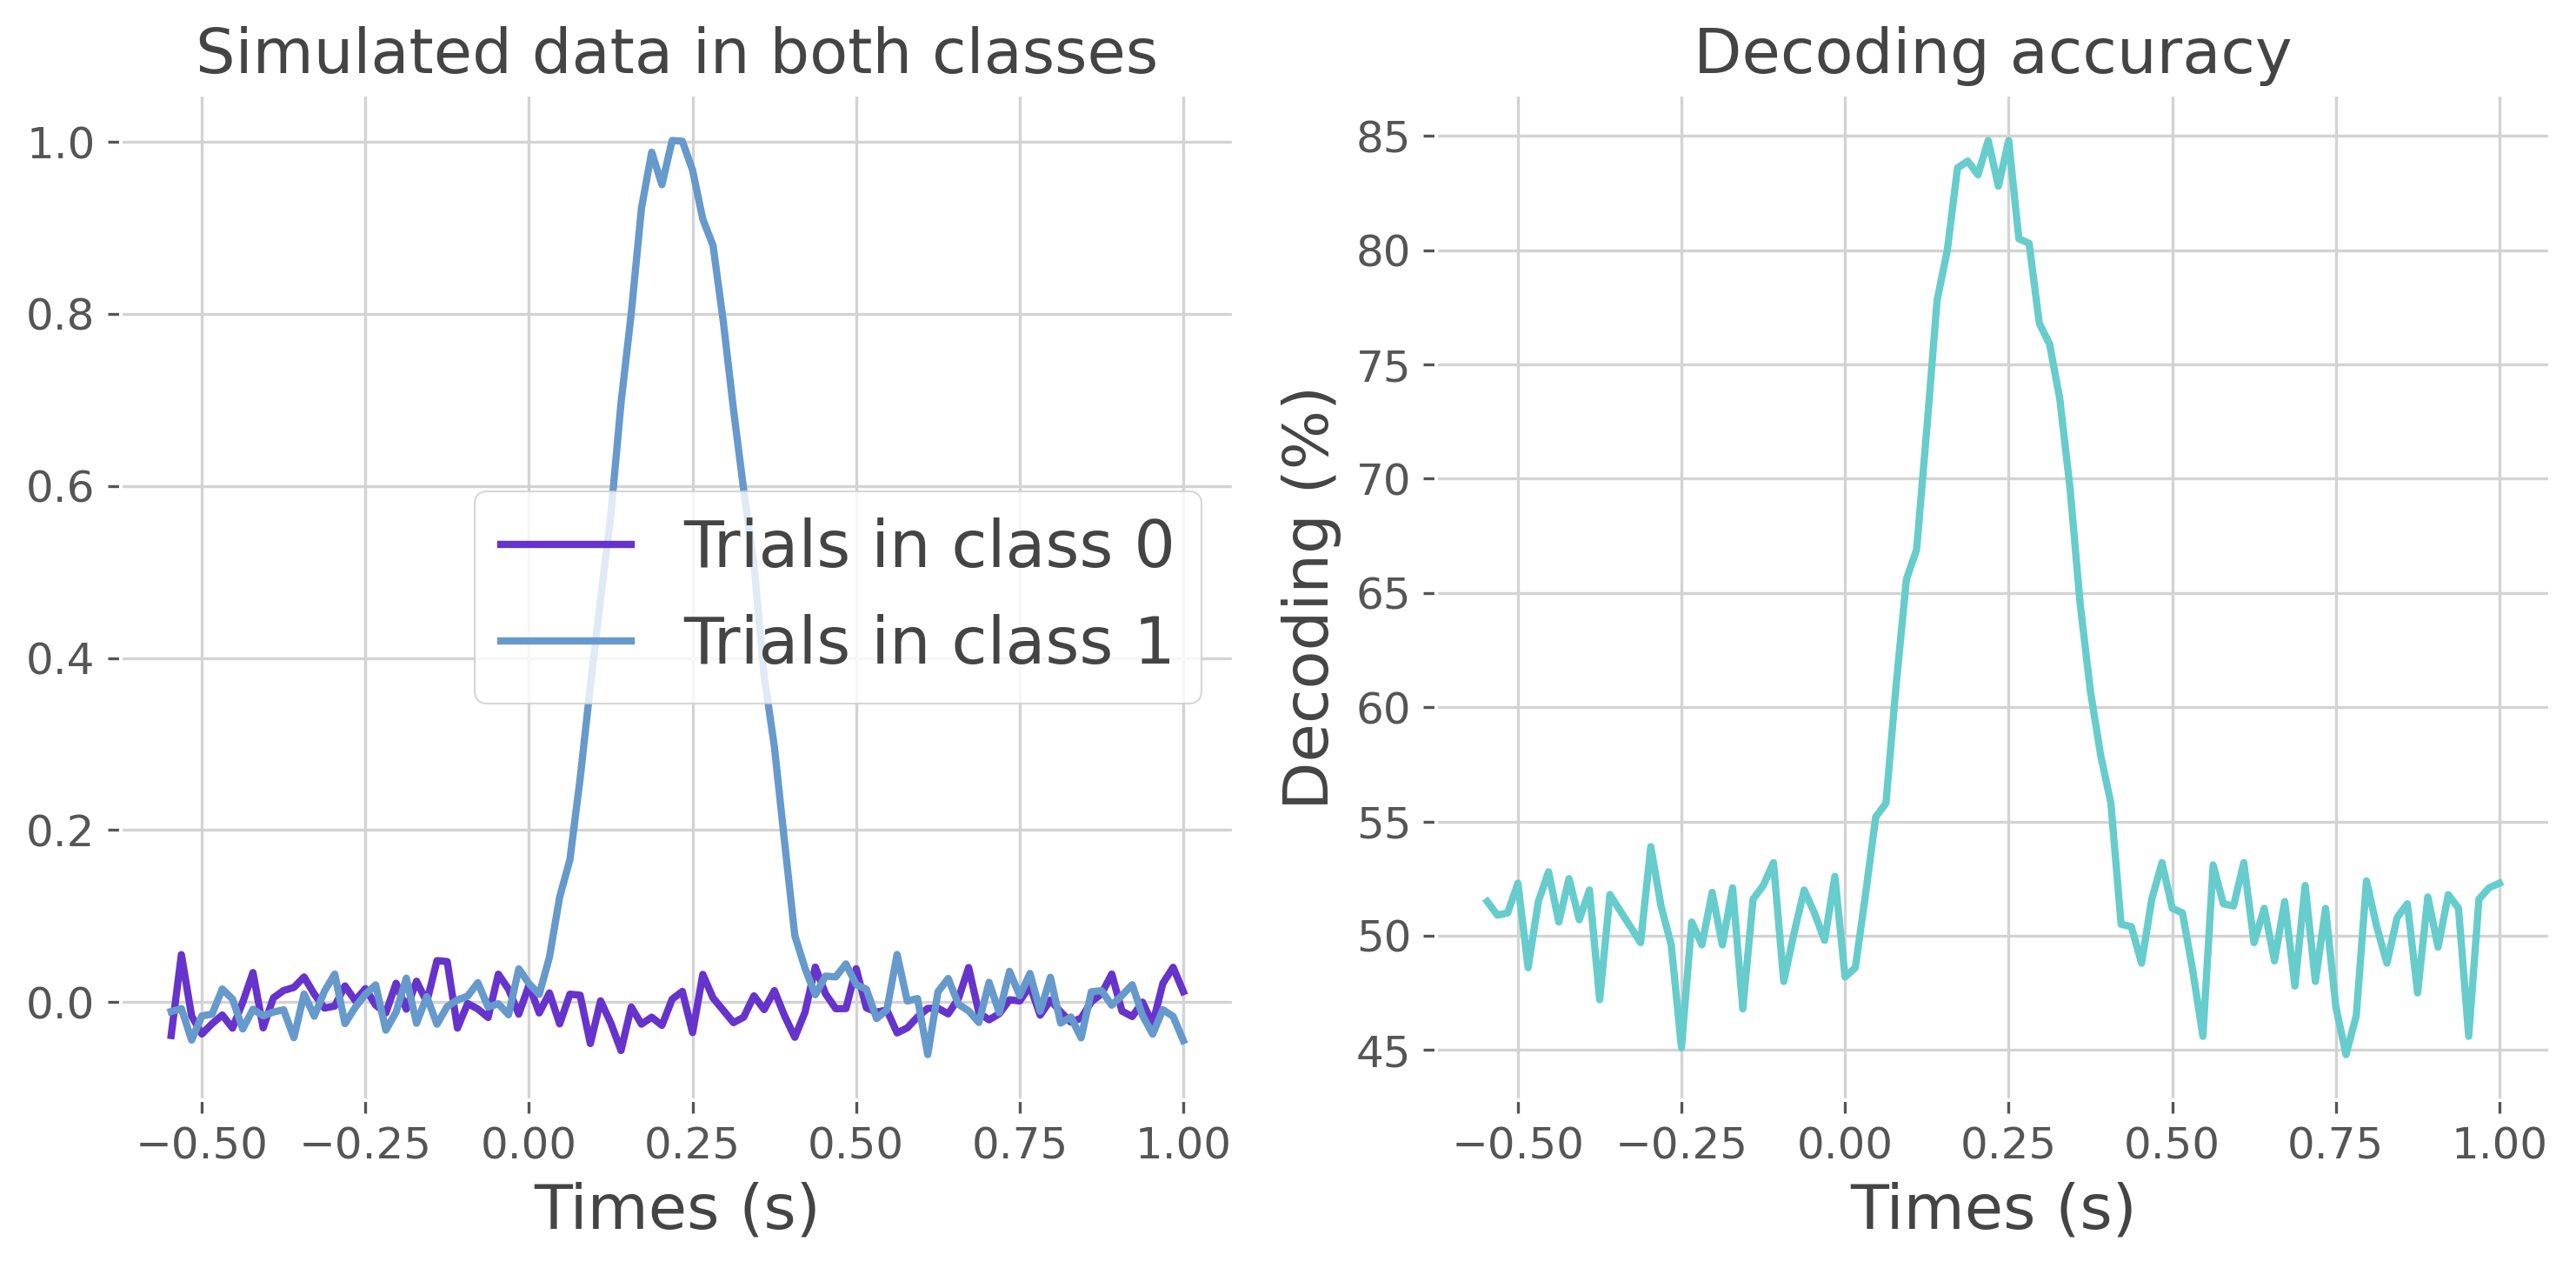 Simulated data in both classes, Decoding accuracy